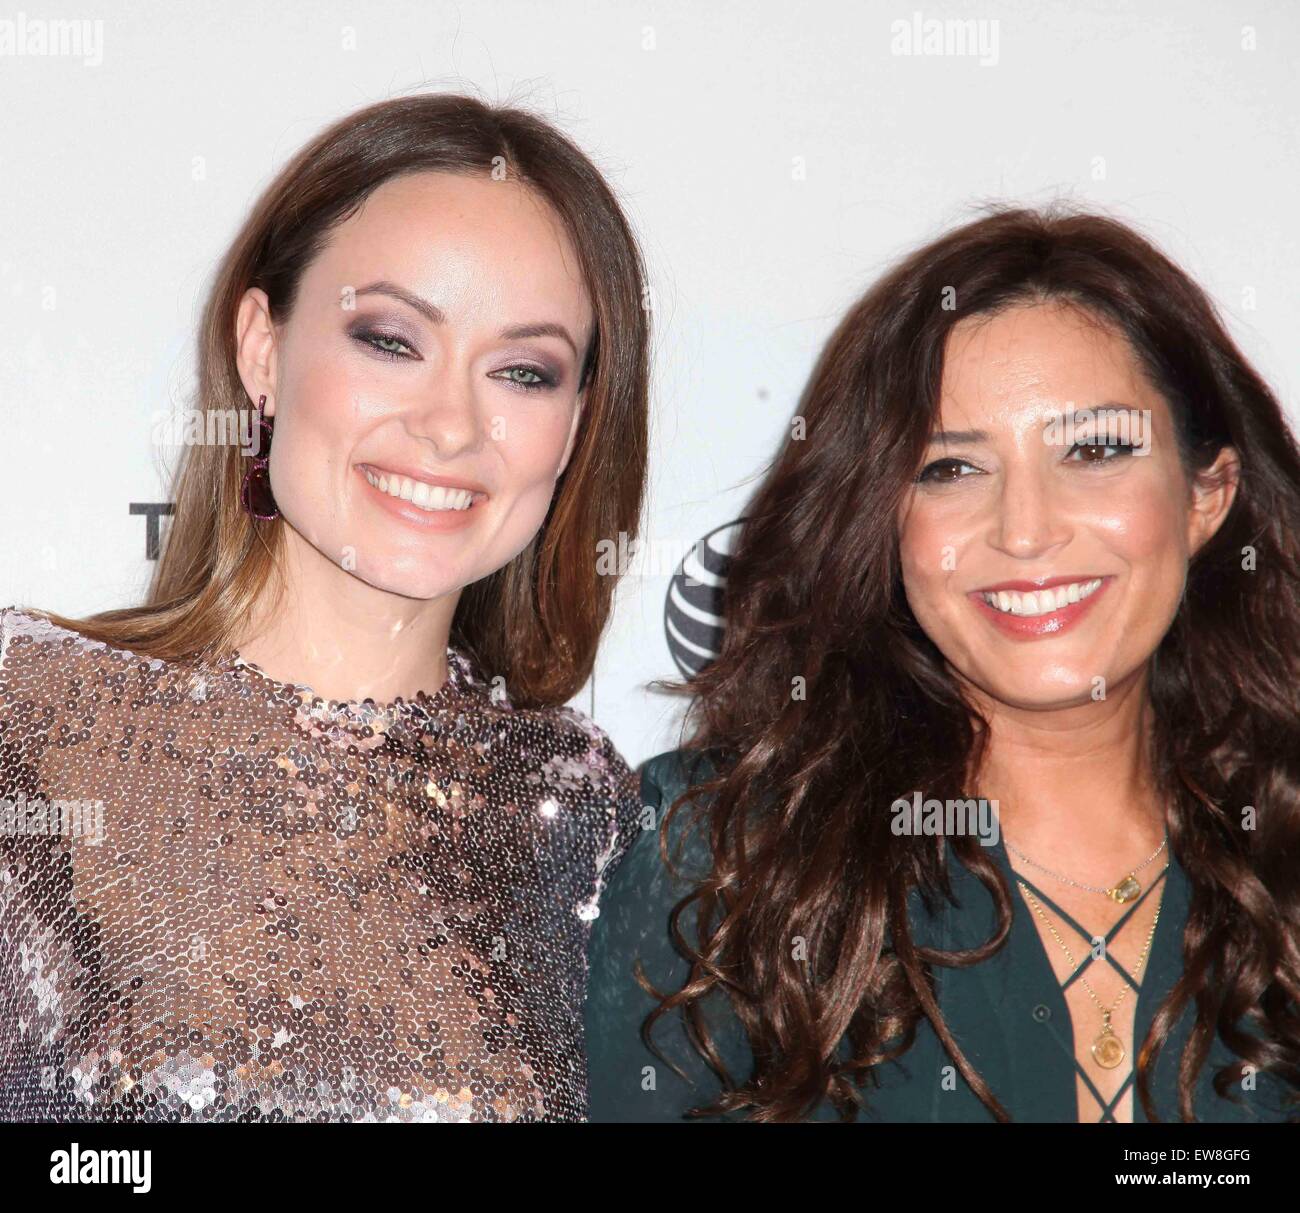 Tribeca Film Festival 2015 - 'Meadowland' - Screening  Featuring: Olivia Wilde, Reed Morano Where: New York, United States When: 18 Apr 2015 Stock Photo